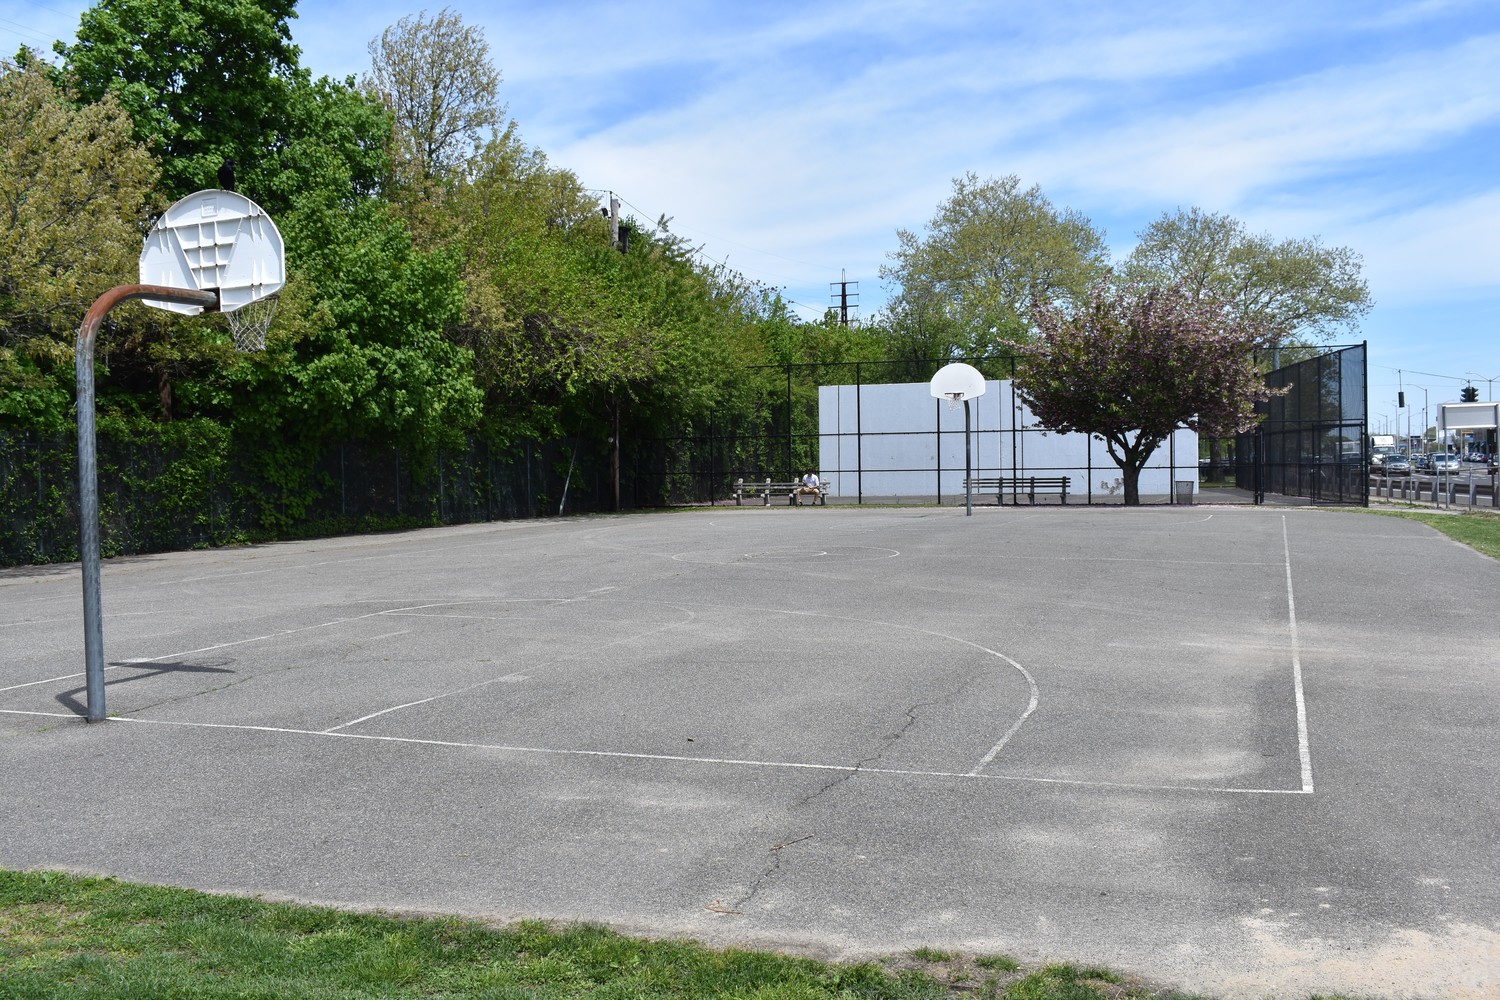 The area’s basketball and handball courts, left, would be replaced.